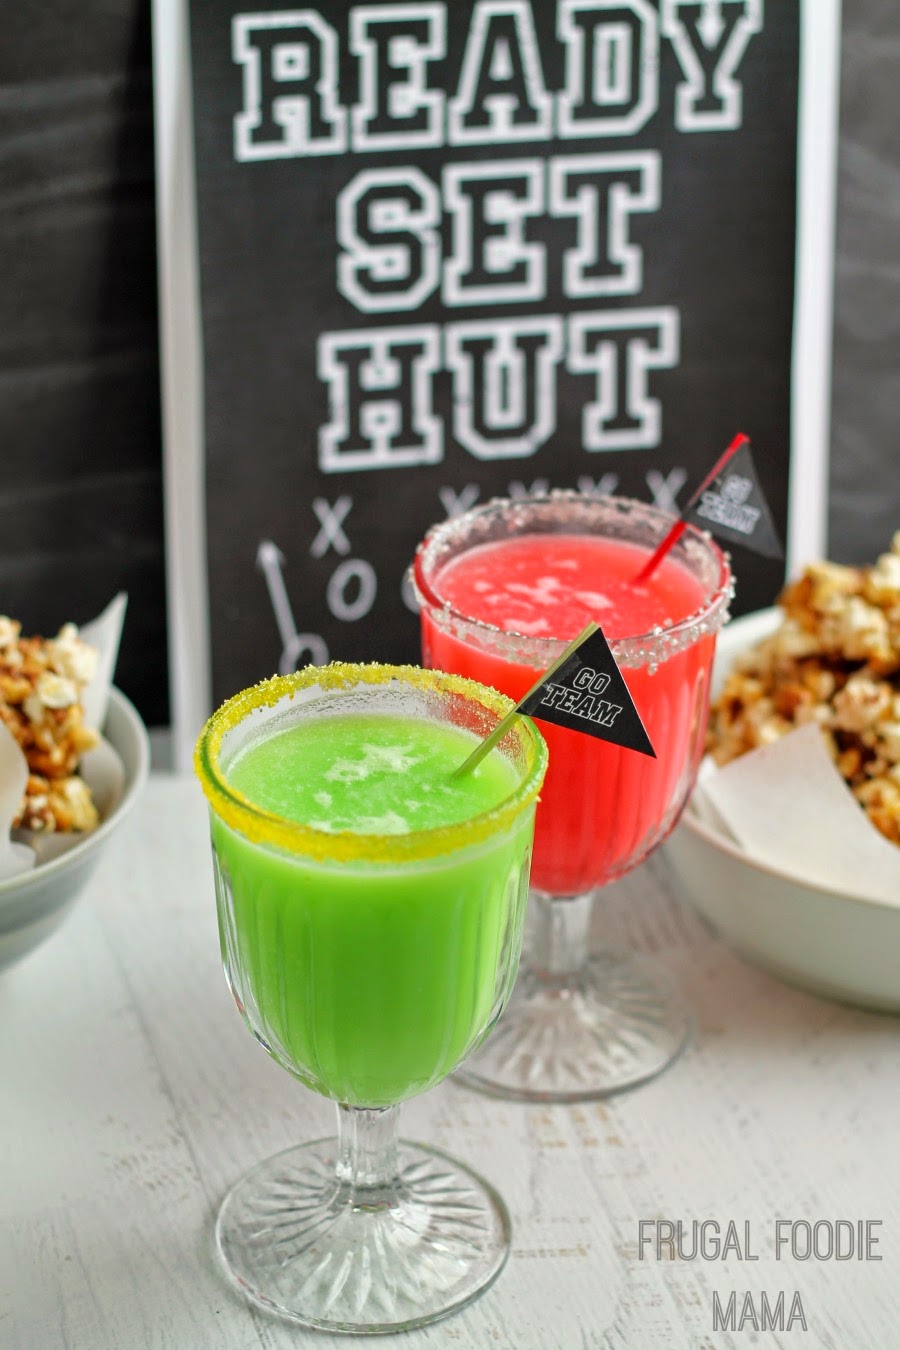 Skittles Game Face Fizz- This fruity and fizzy drink is fun for all ages! Make it in your favorite team colors for the big game.